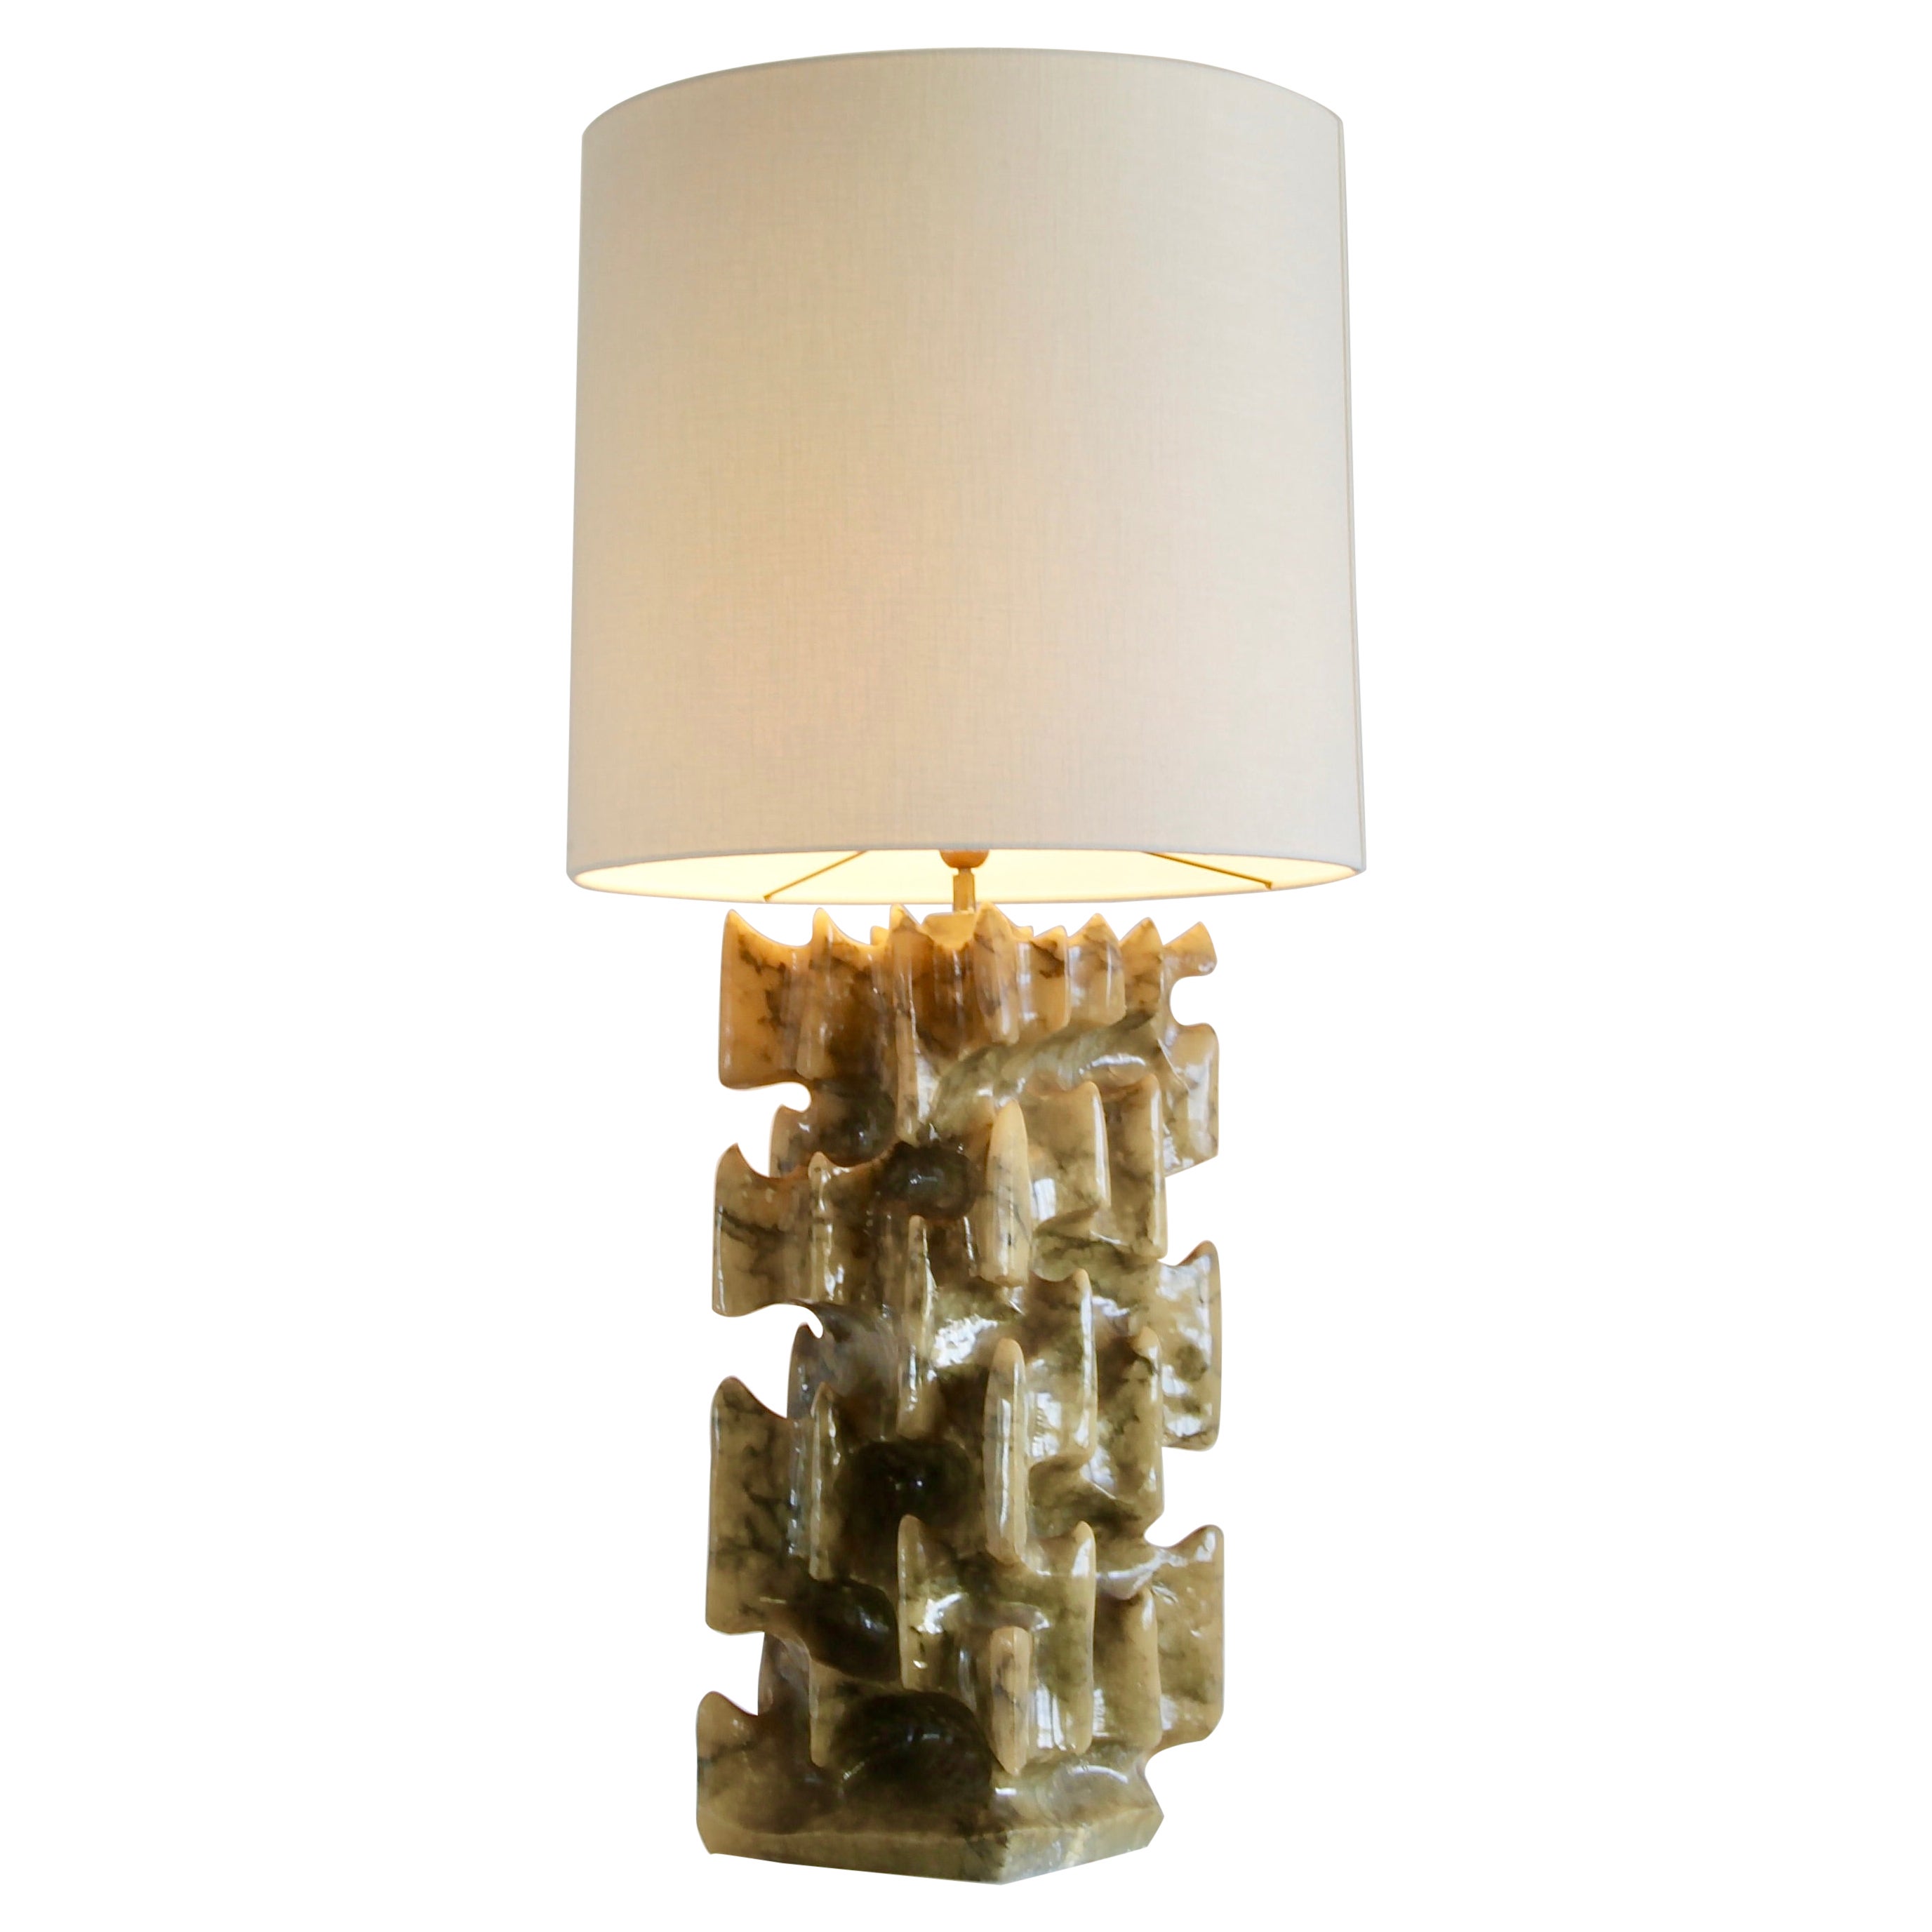 Unique Large Carved Alabaster Table Lamp, 1960s/1970s, Italy For Sale